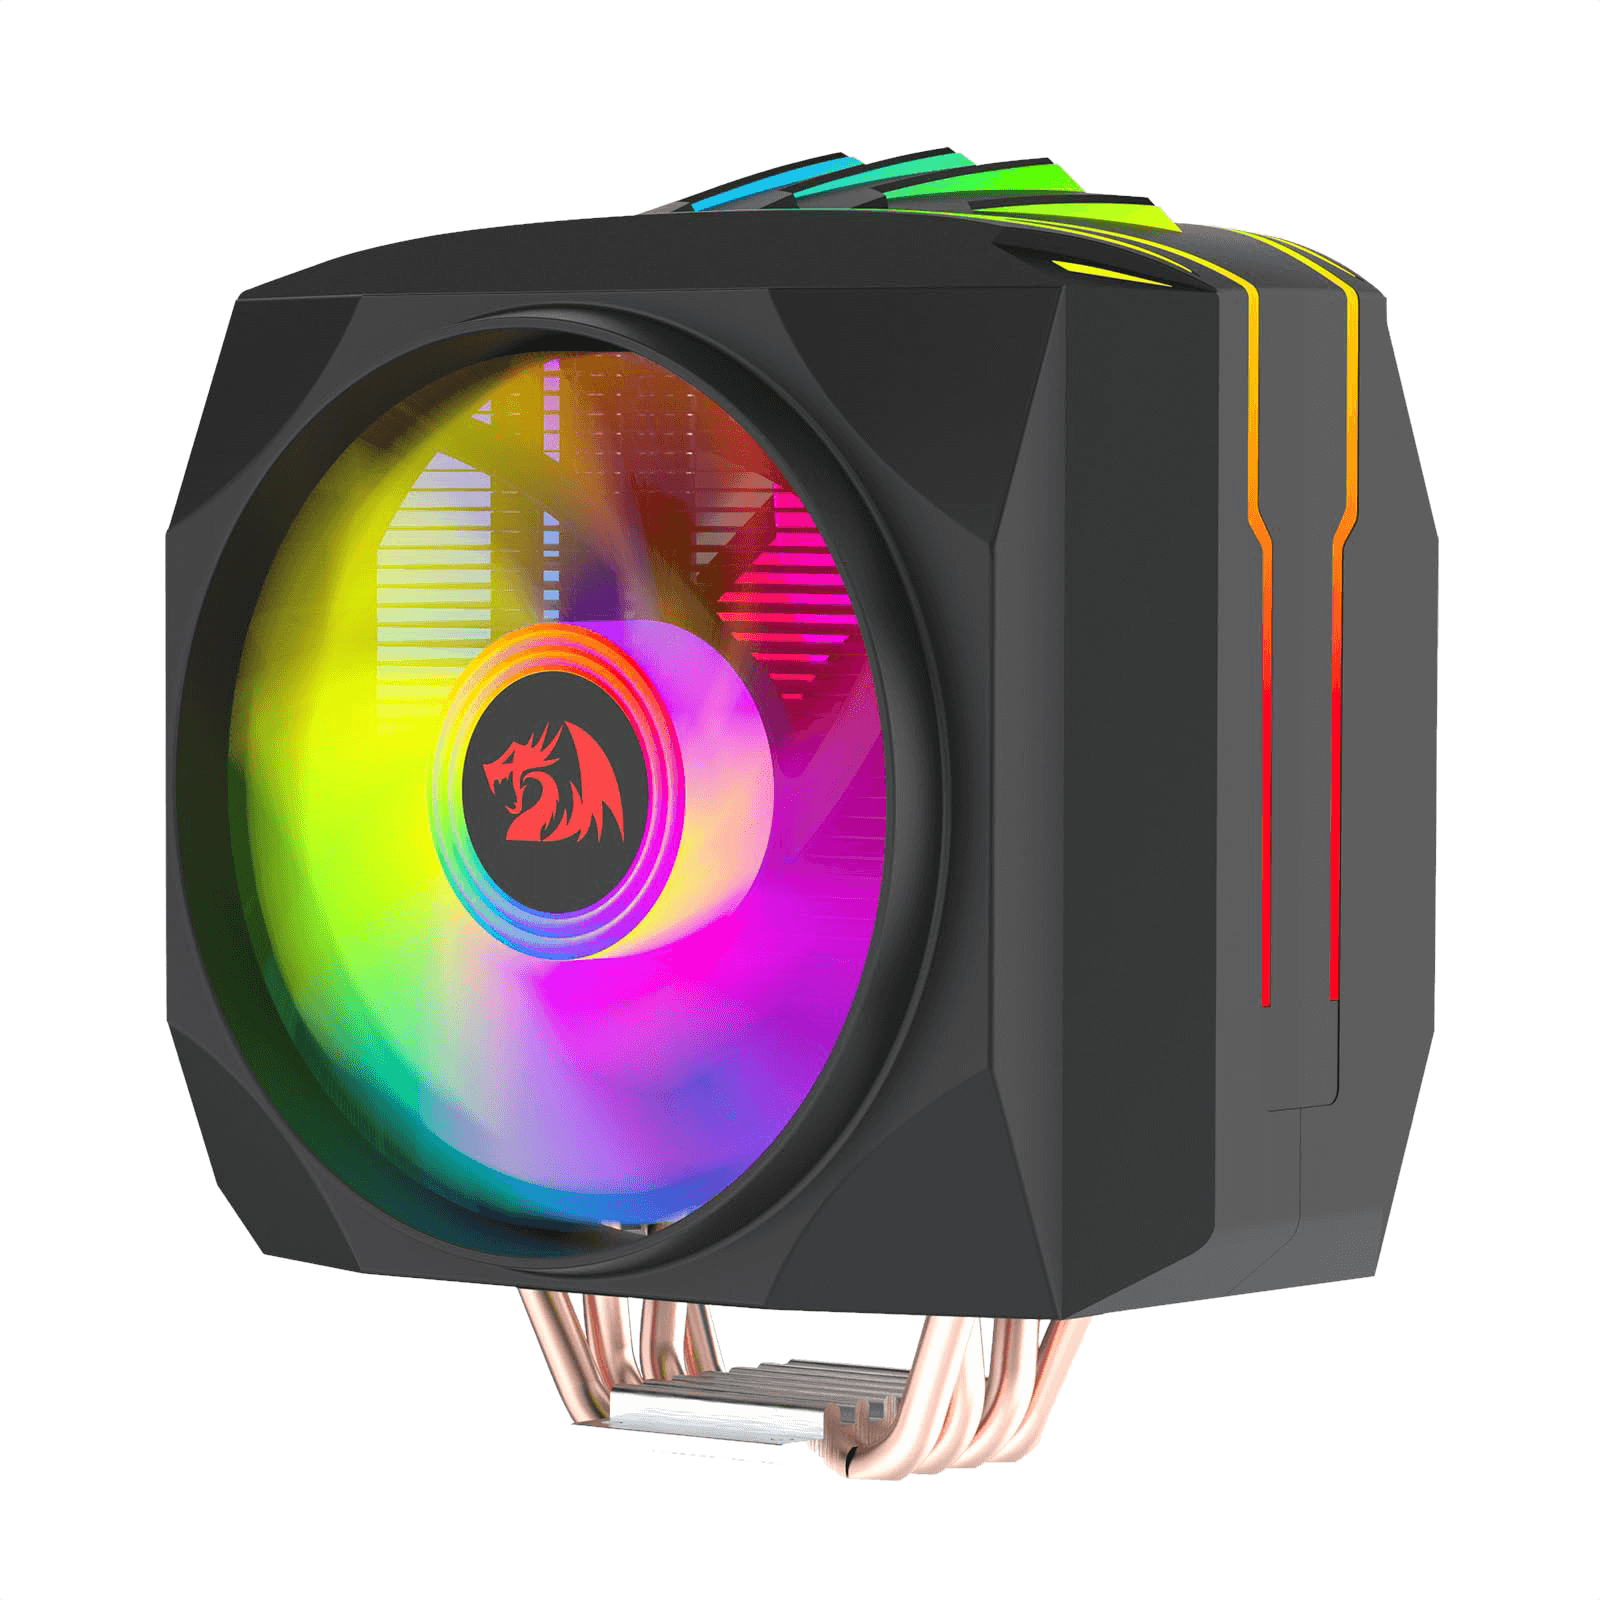 Redragon C219 CPU Air Cooler, A-RGB CPU Cooling FDB Fan, 2 x 120mm PWM Quiet Fans, 4 Heat Pipes & Smooth Copper Base, Single Tower for Intel 1700